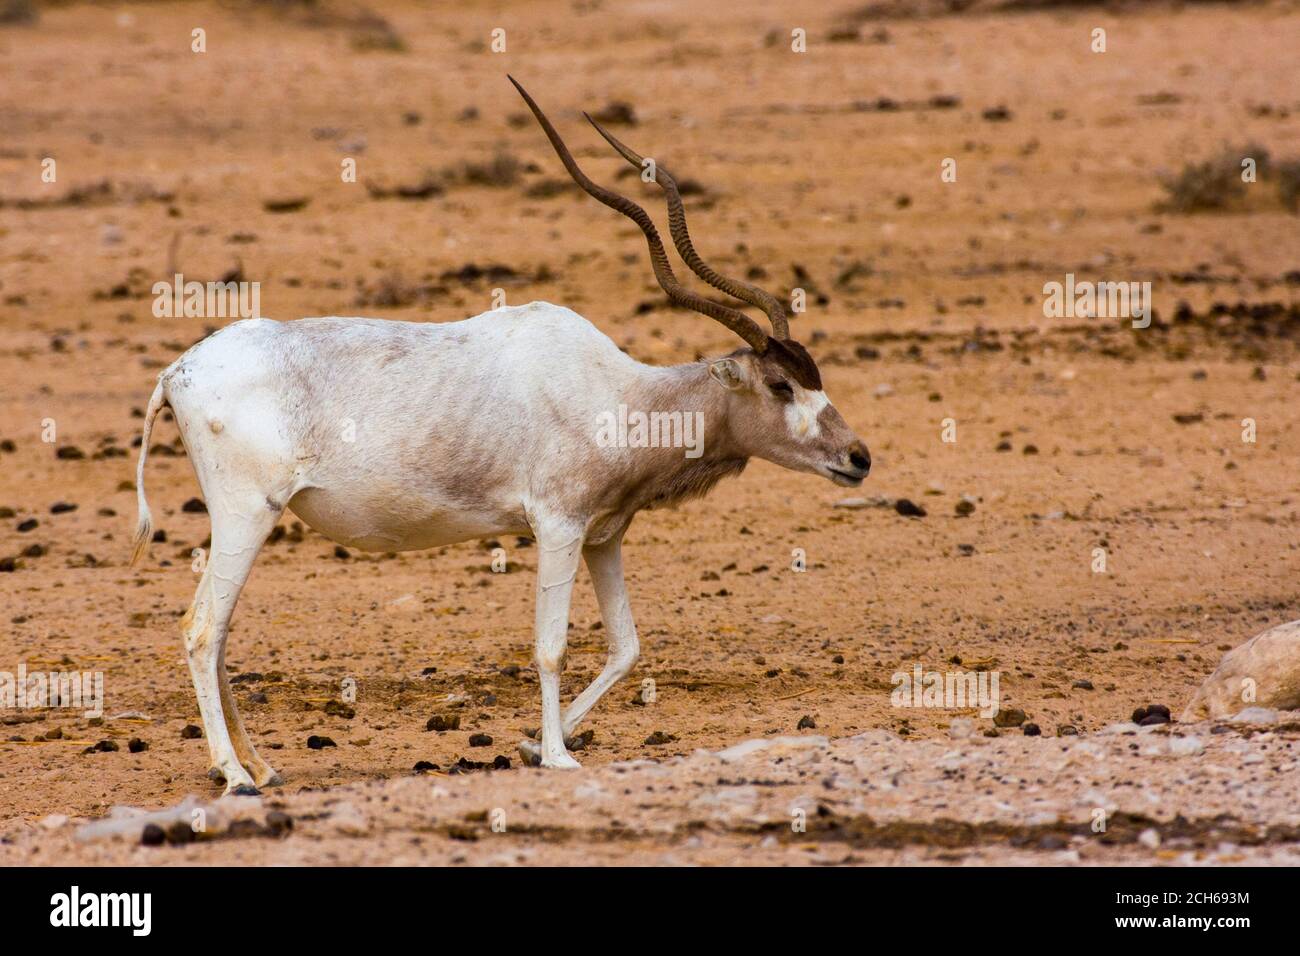 Addax (Addax nasomaculatus) critically endangered desert antelope, Extinct in the wild in Israel. Photographed at the Yotvata Hai-Bar Nature Reserve b Stock Photo